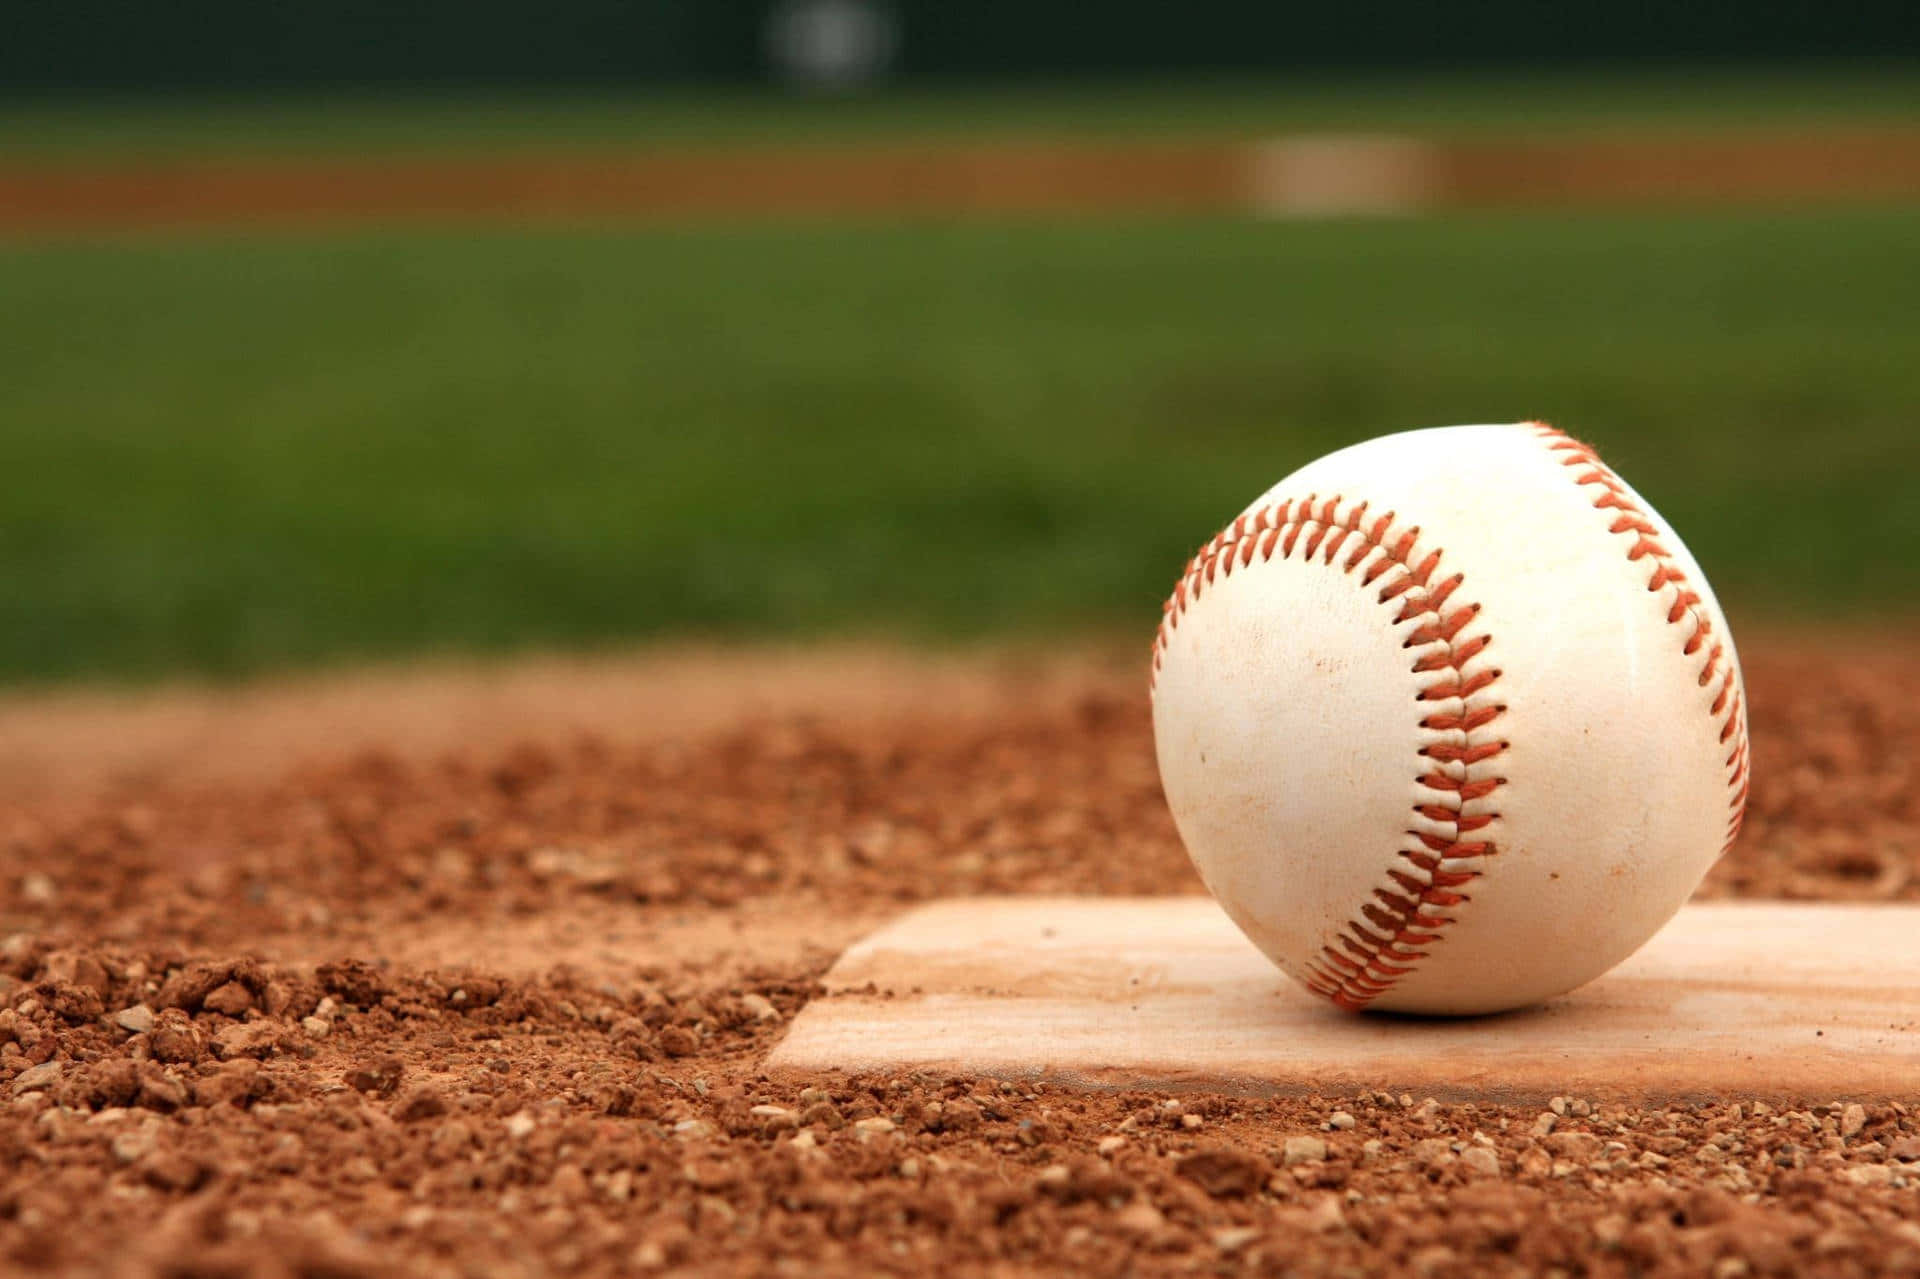 Get Ready to Play the Awesome Game of Baseball Wallpaper